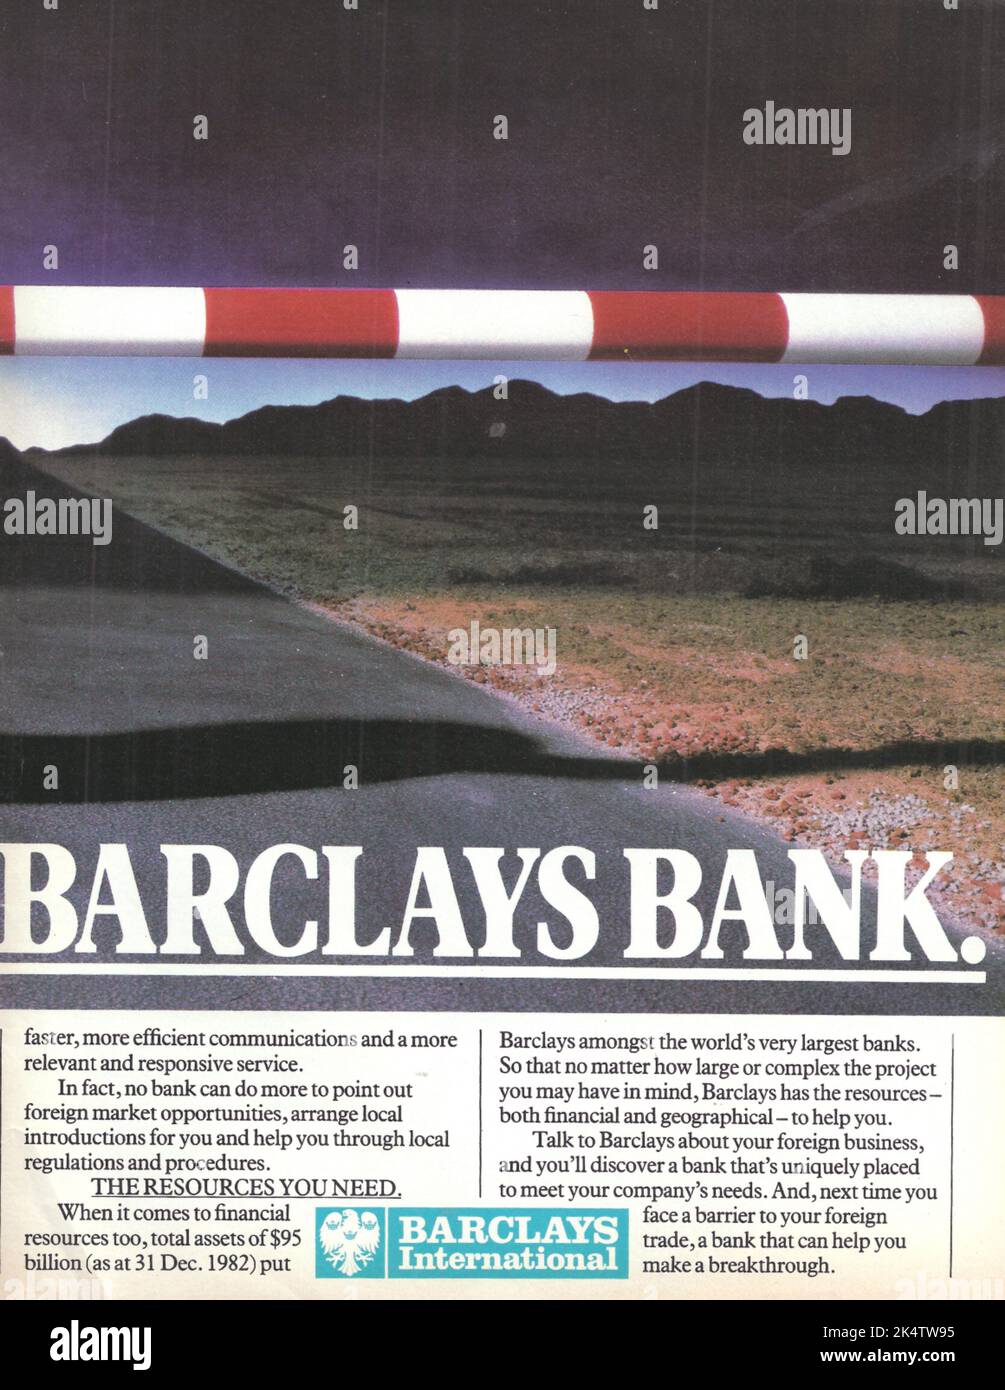 Barclay bank financial institution advertisement bank magazine advert 1980s 1970s Stock Photo